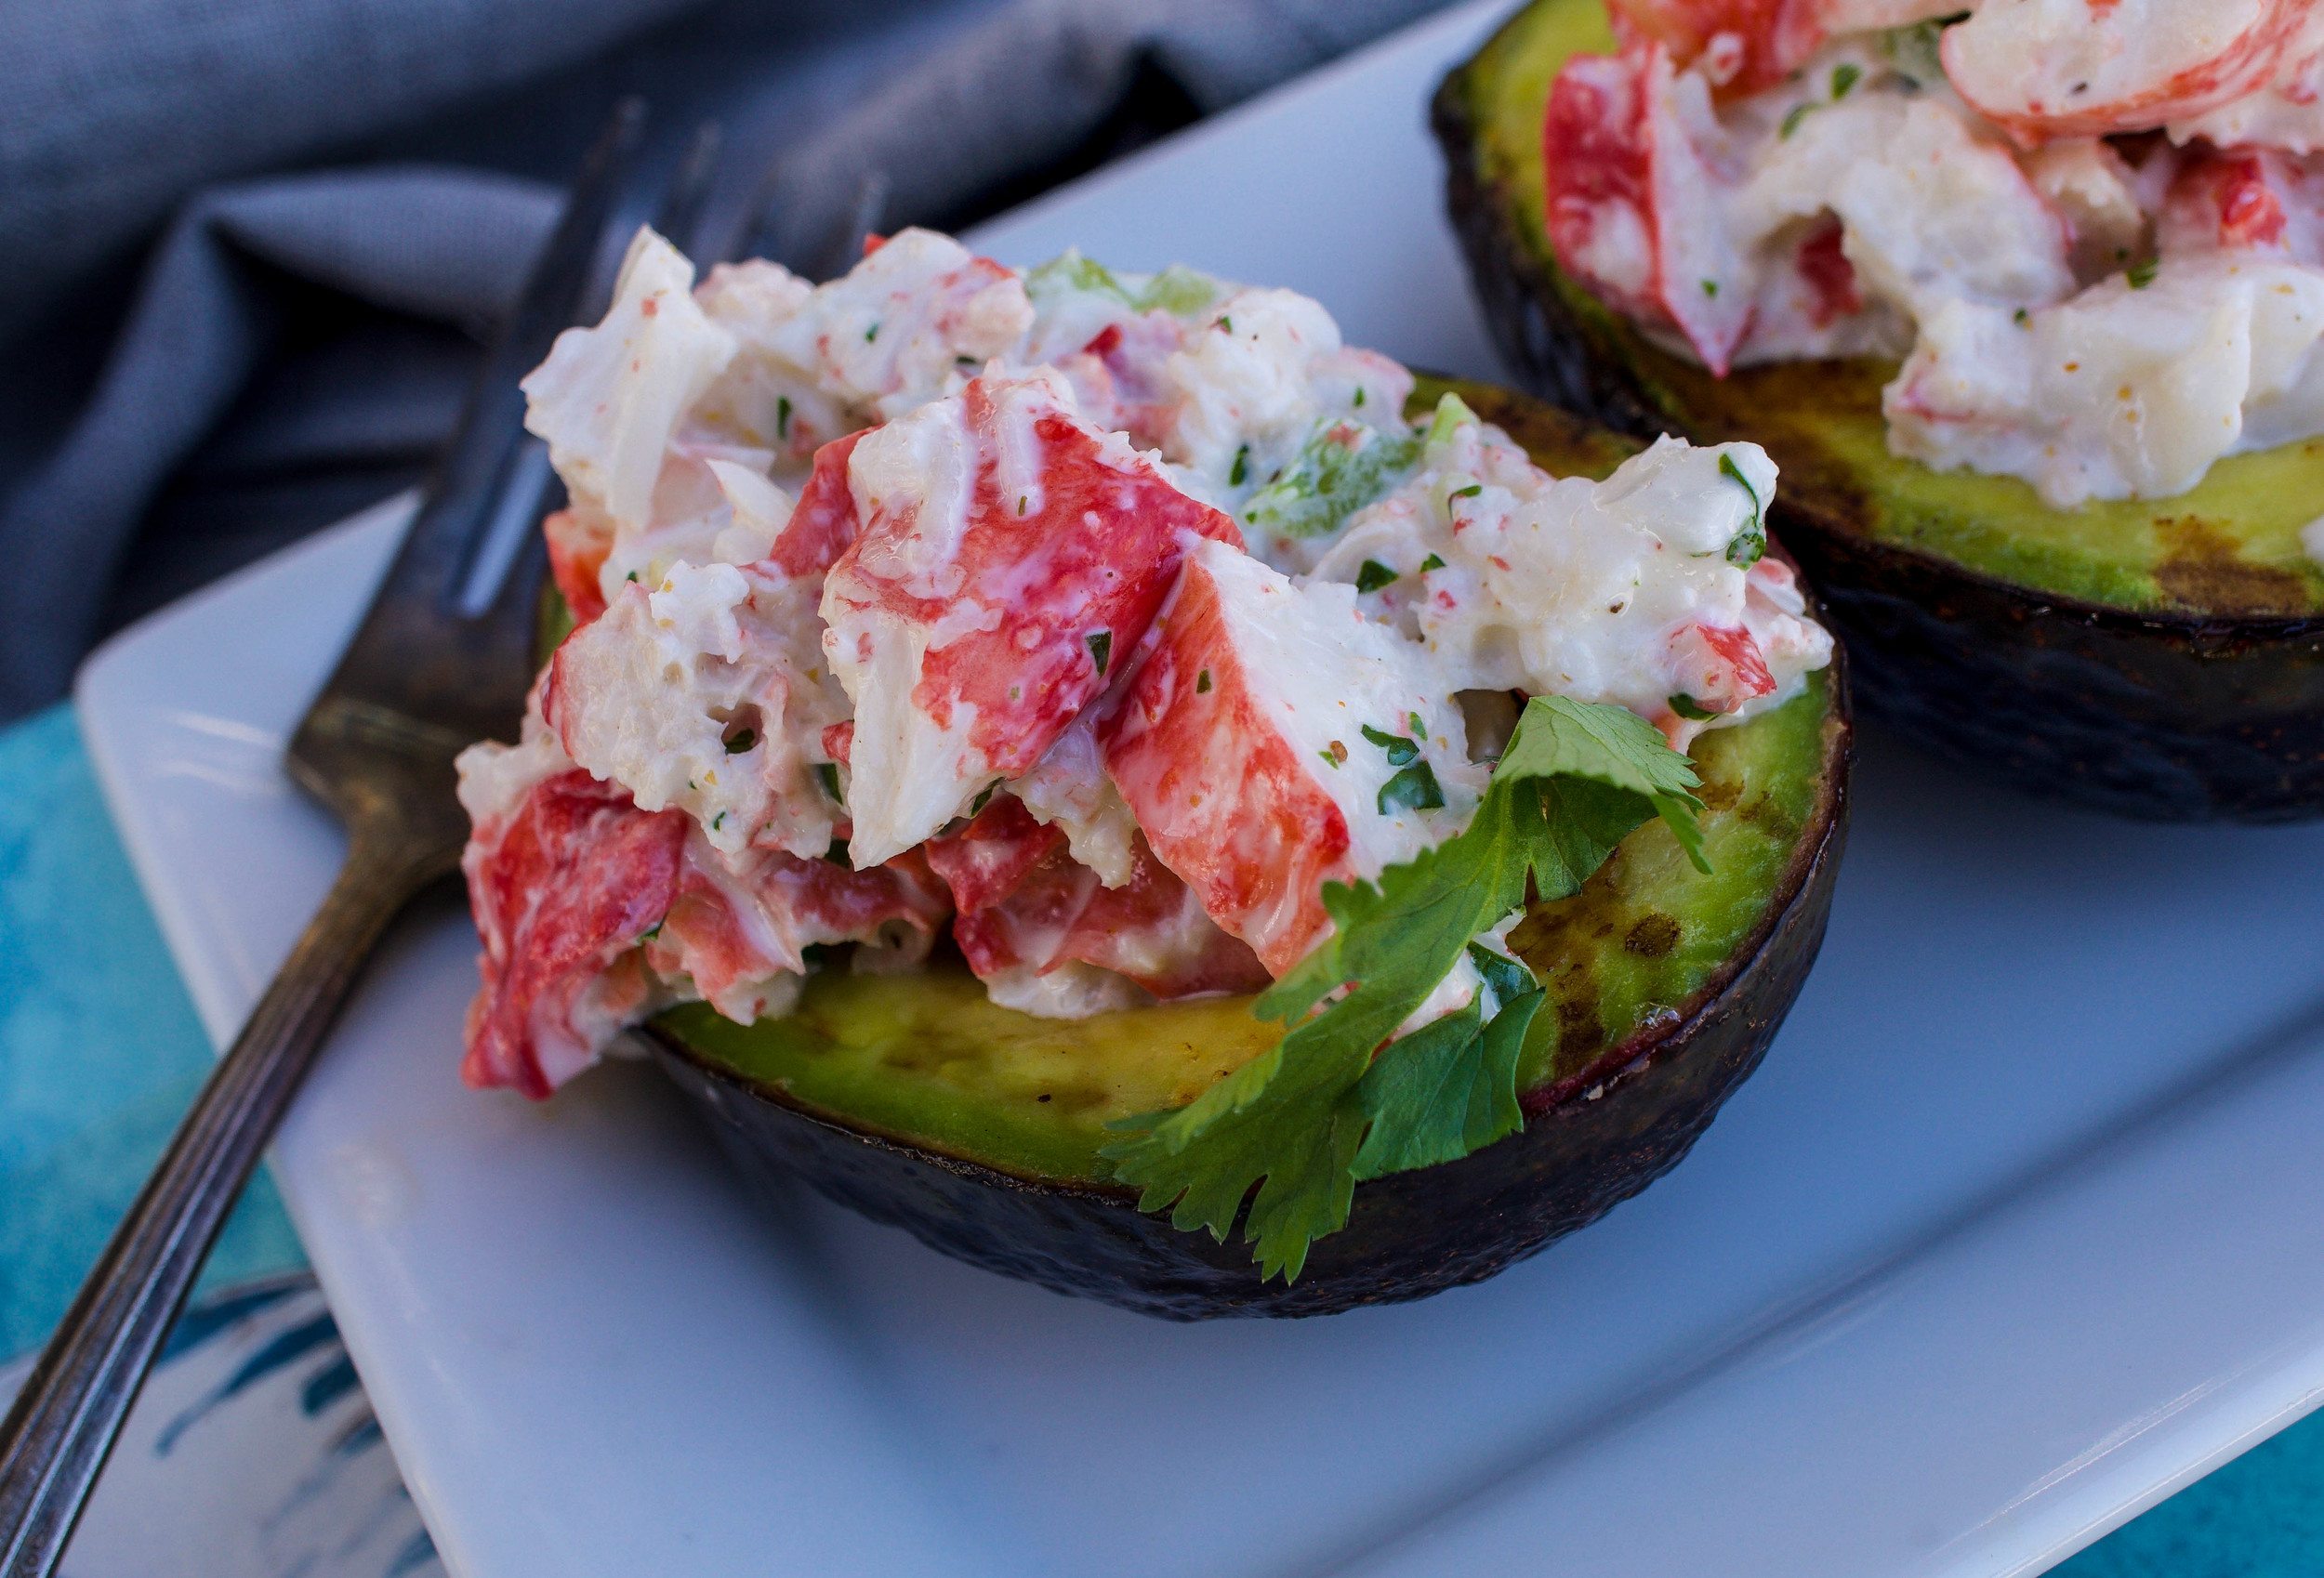 Alaskan King Crab Salad with Grilled Avocados is an indulgent treat perfect for a spring or summer meal.